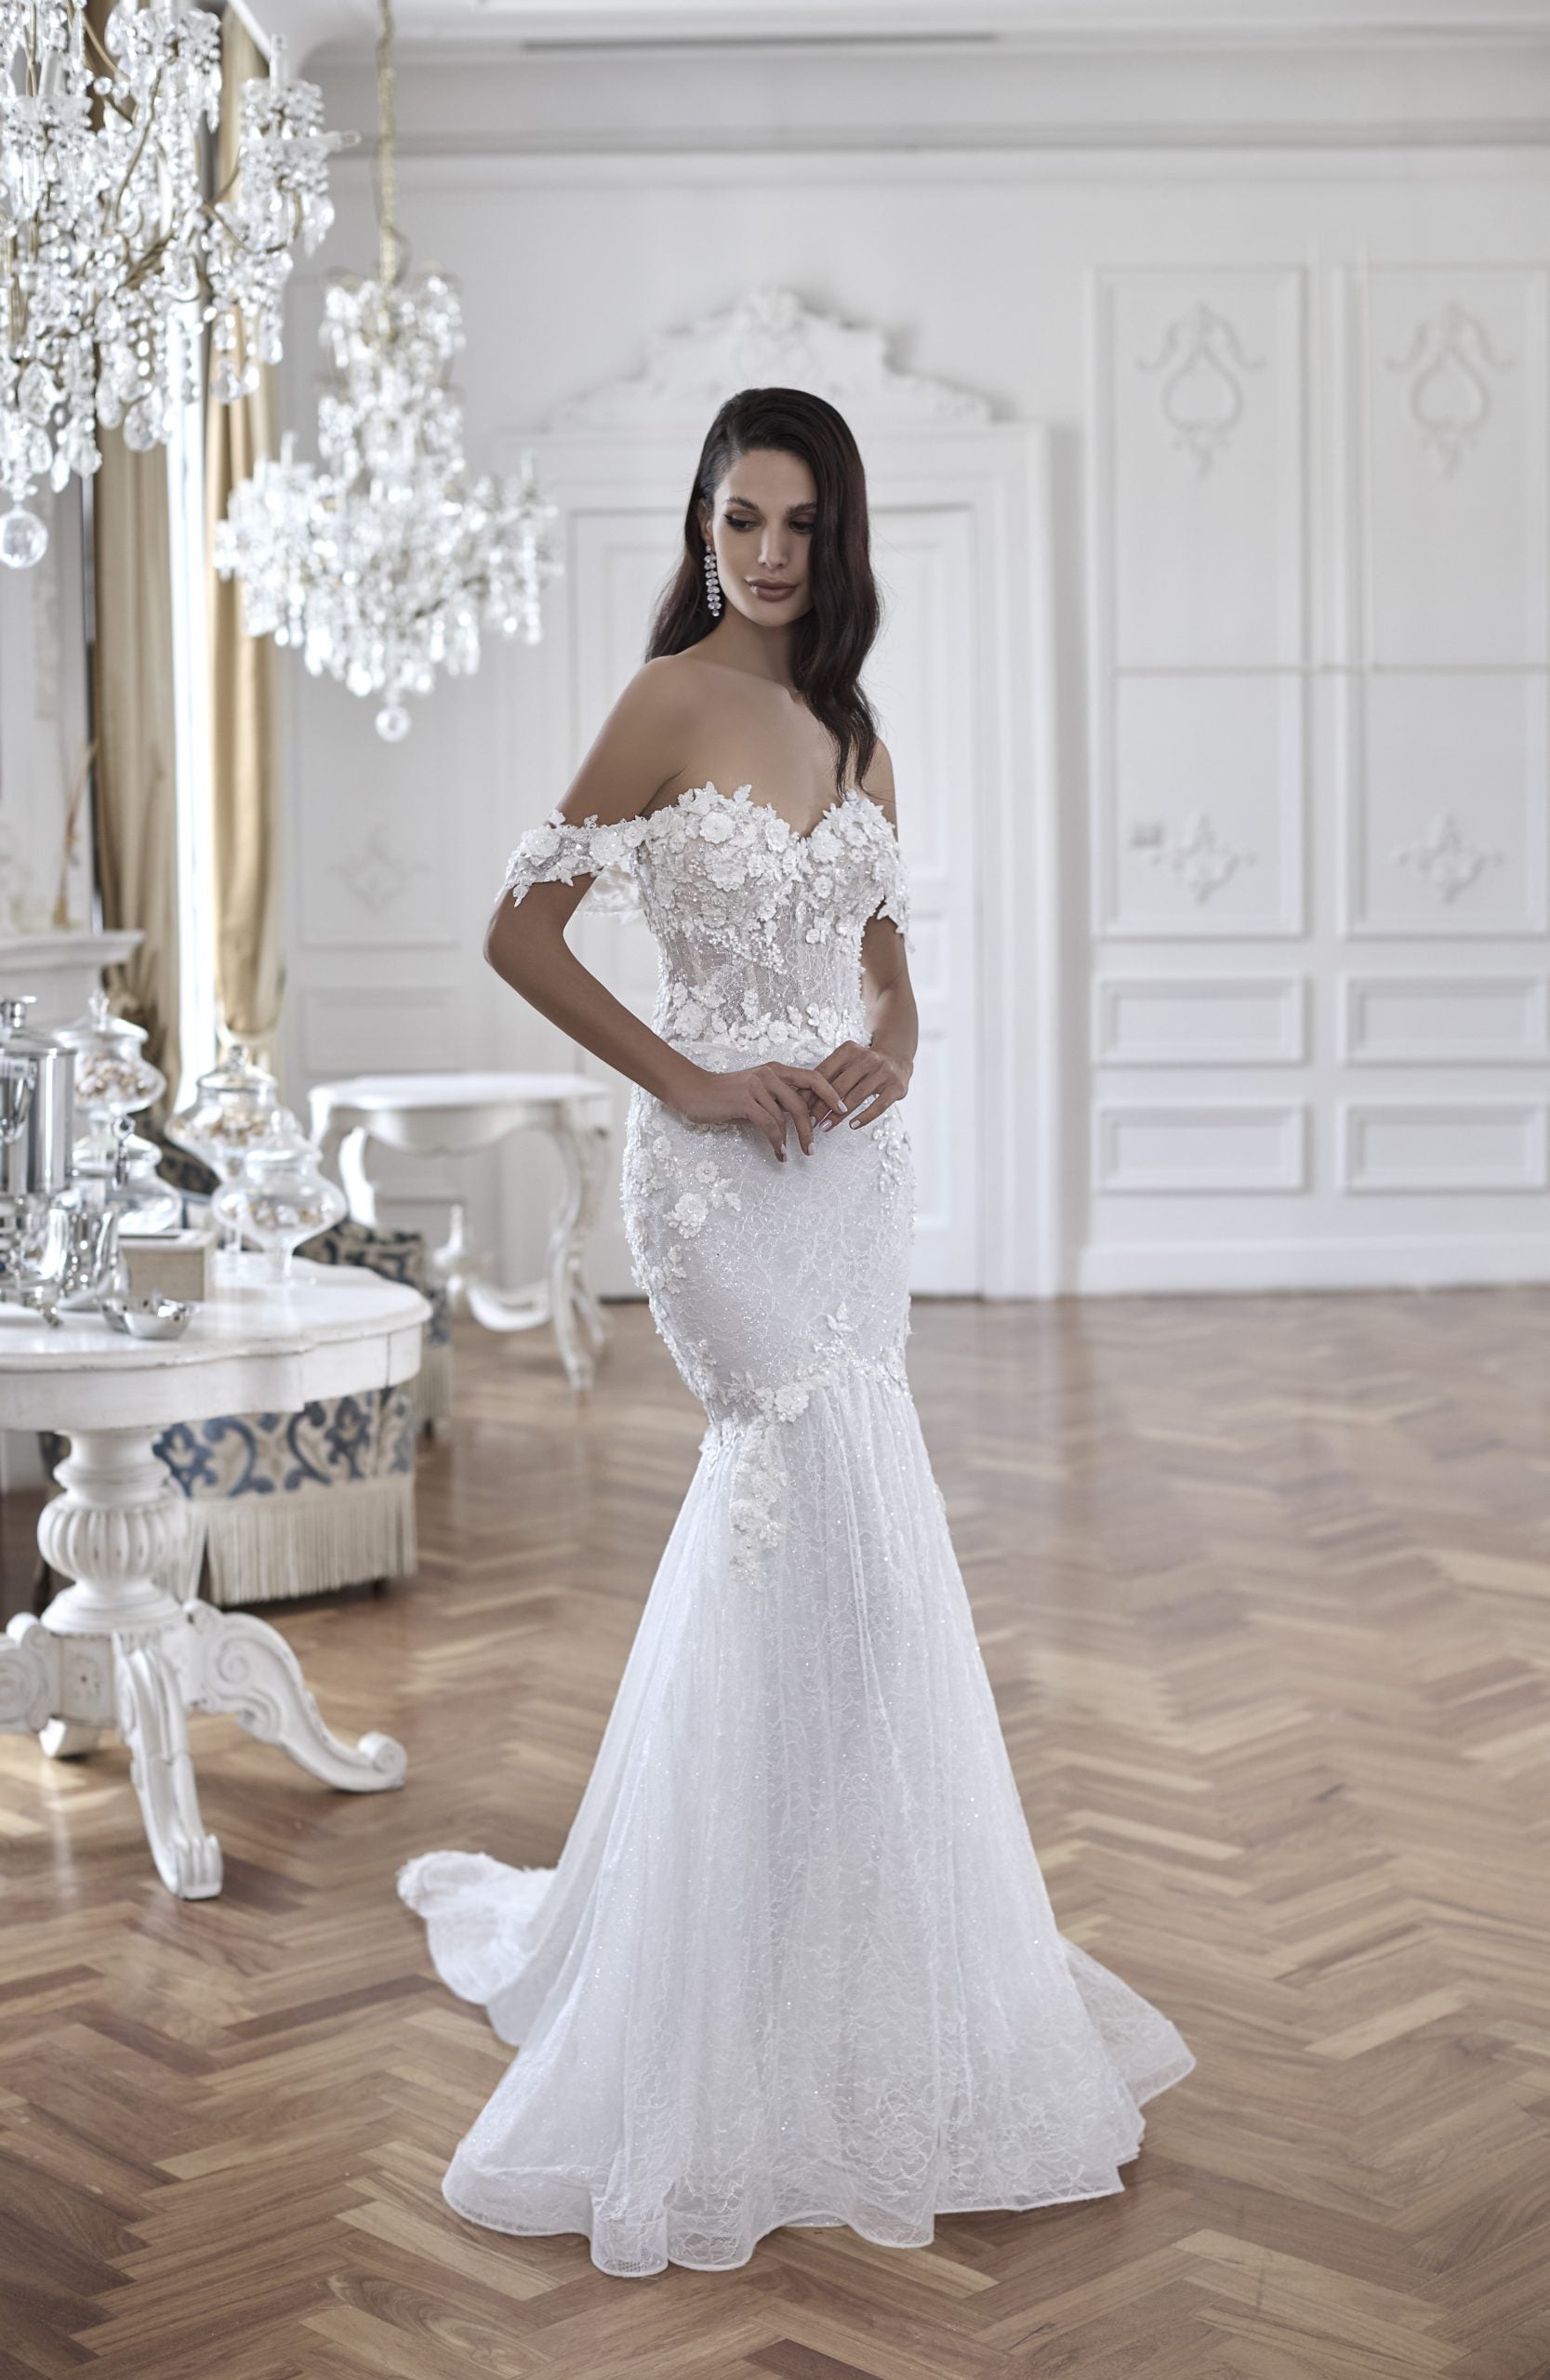 Off The Shoulder Fit And Flare Wedding Dress With 3D Floral Embroidery by Maison Signore - Image 1